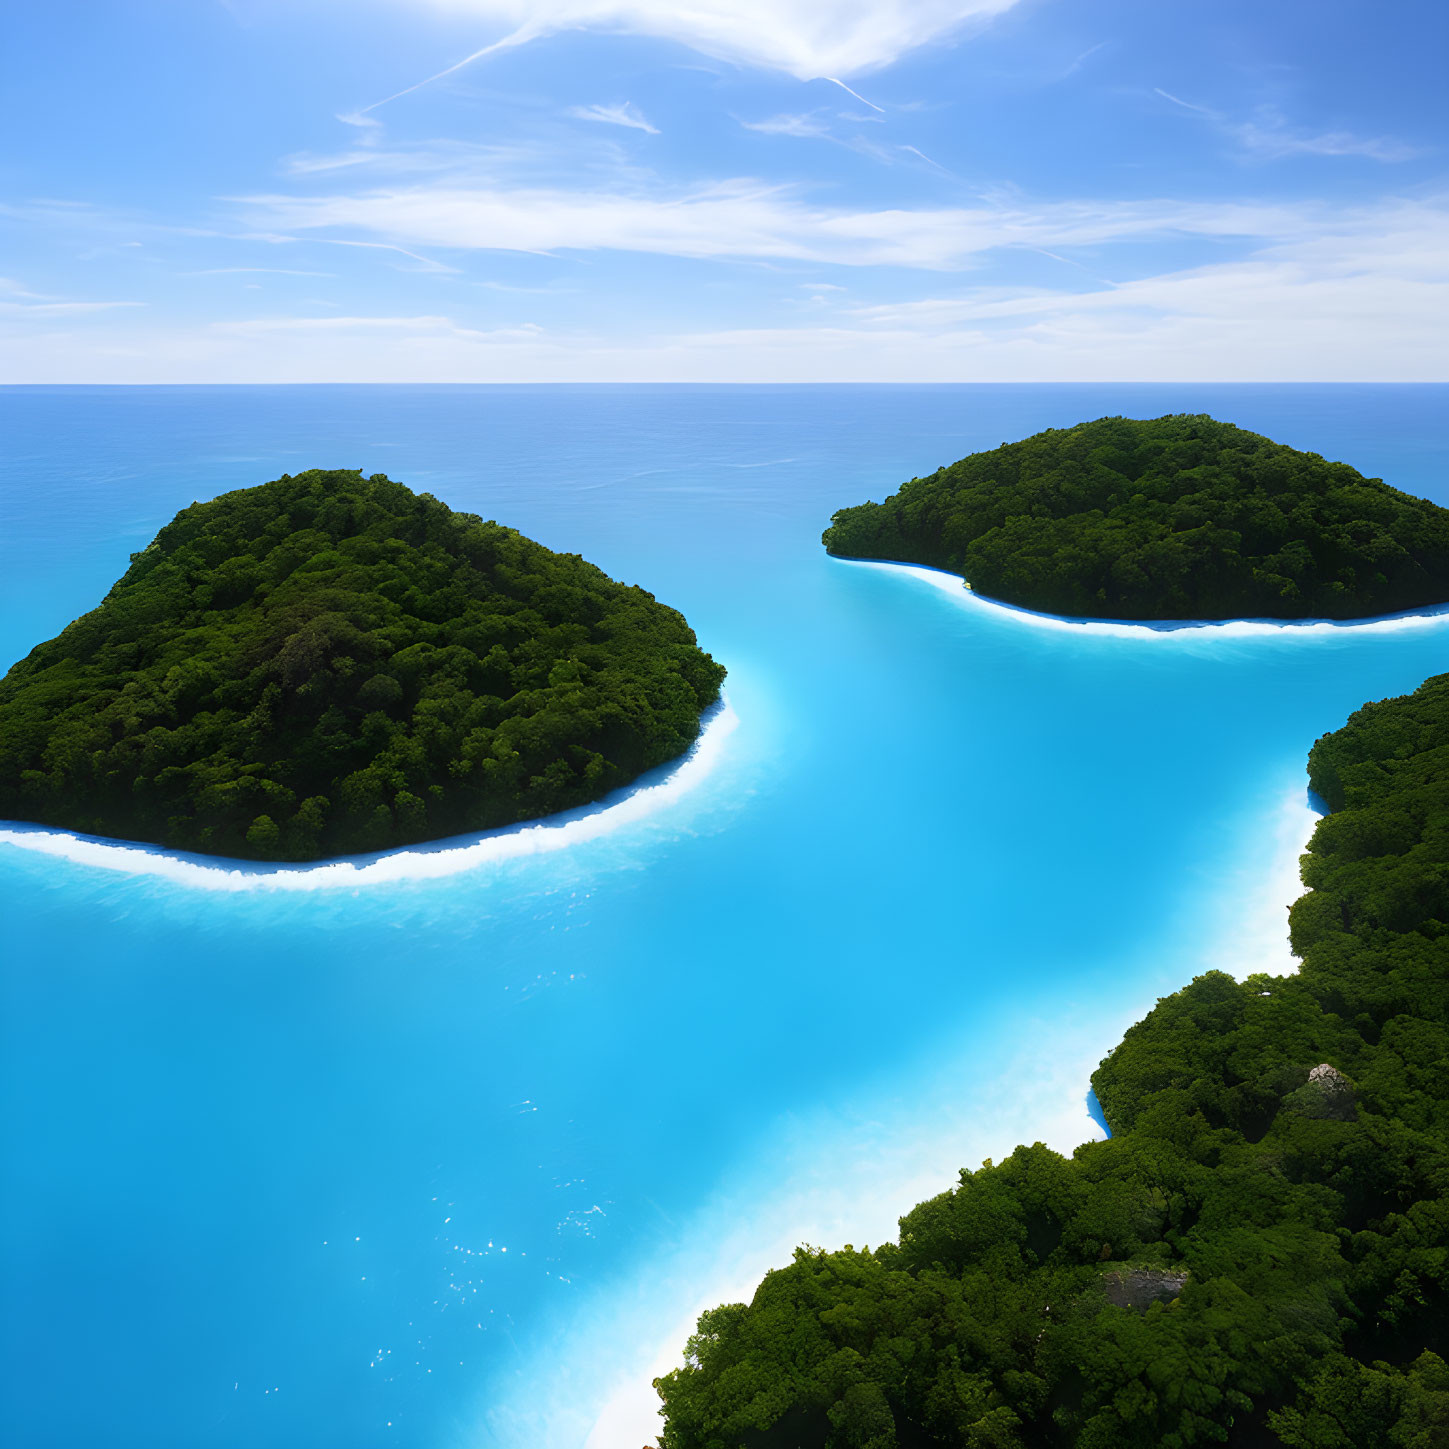 Lush Green Islands in Turquoise Blue Waters